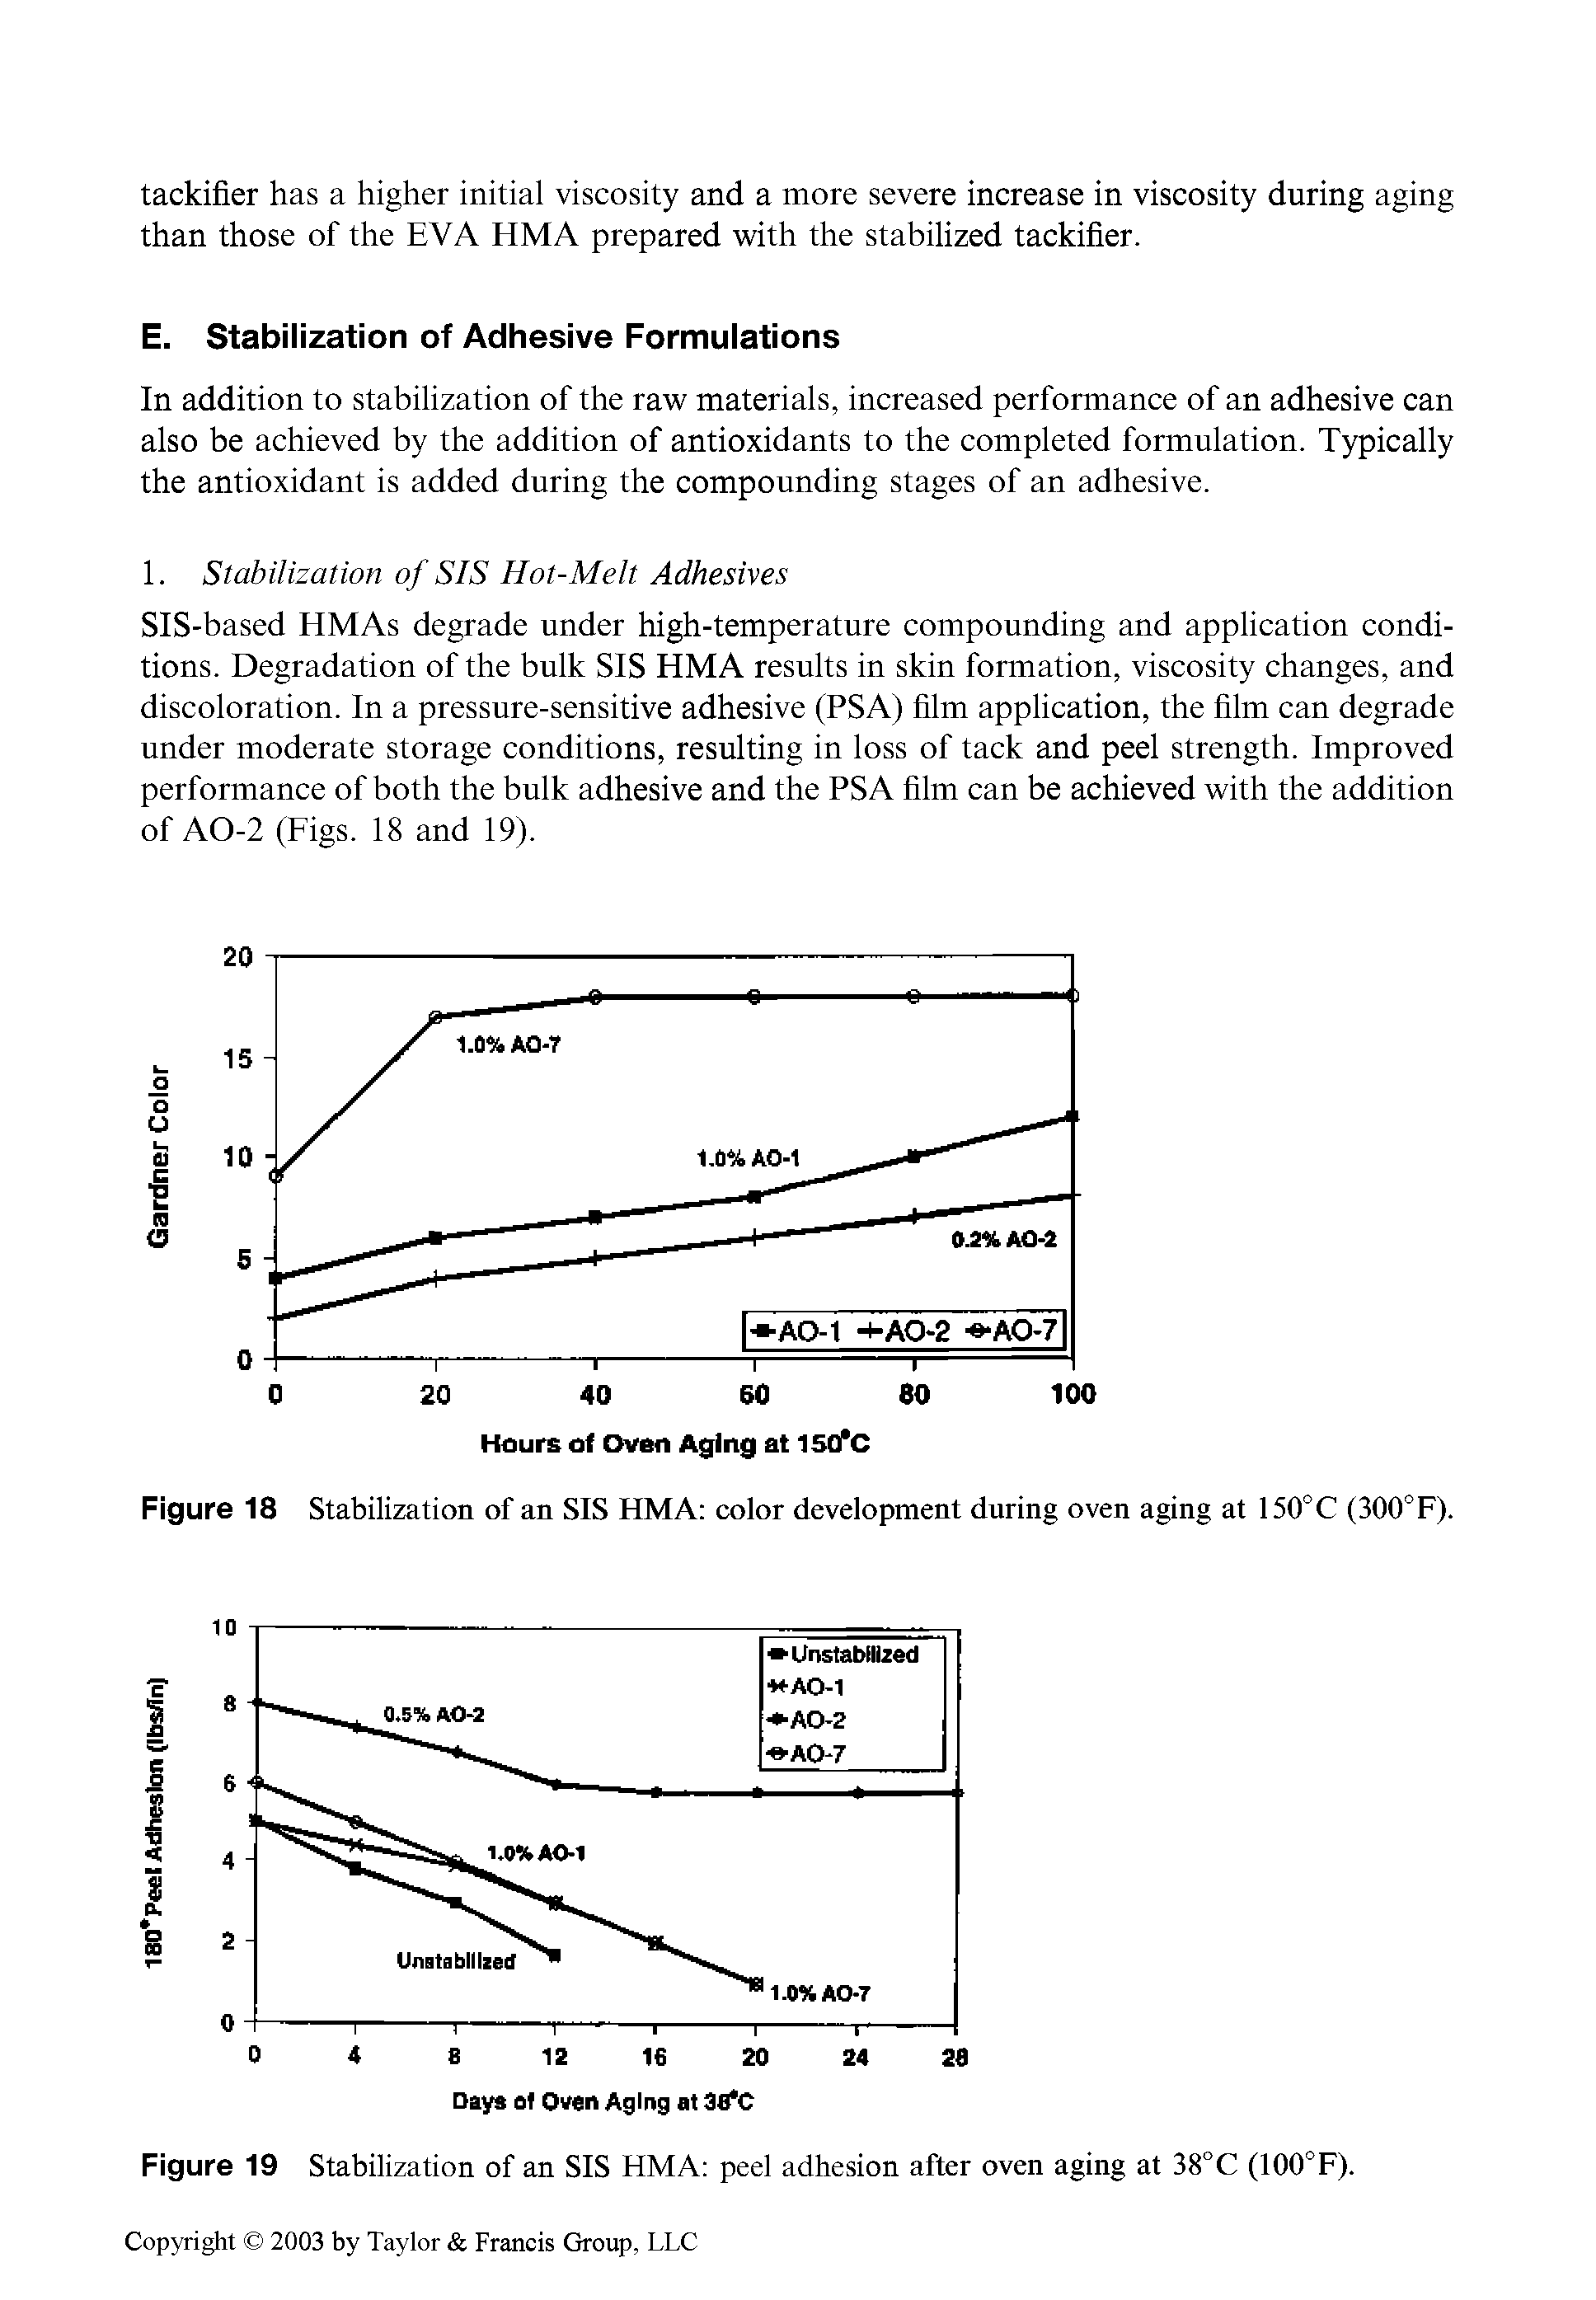 Figure 18 Stabilization of an SIS HMA color development during oven aging at 150°C (300°F).